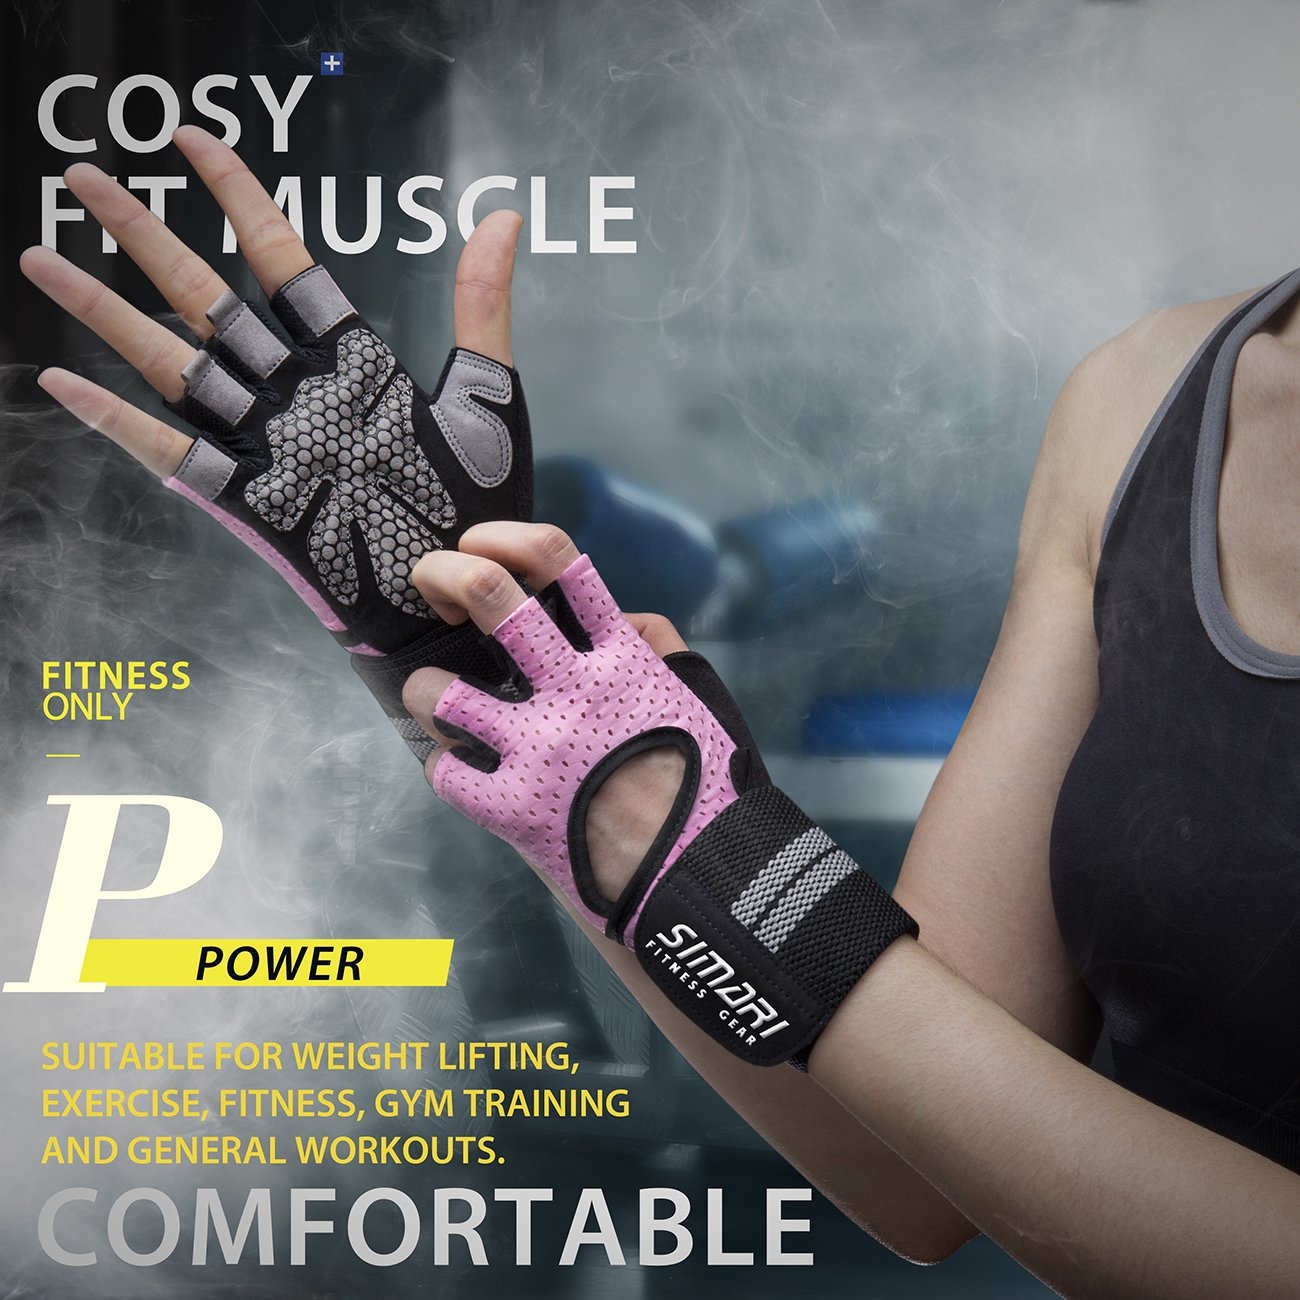 SIMARI Workout Gloves for Women Men,Training Gloves with Wrist Support for Fitness Exercise Weight Lifting Gym Crossfit,Made of Microfiber and Lycra